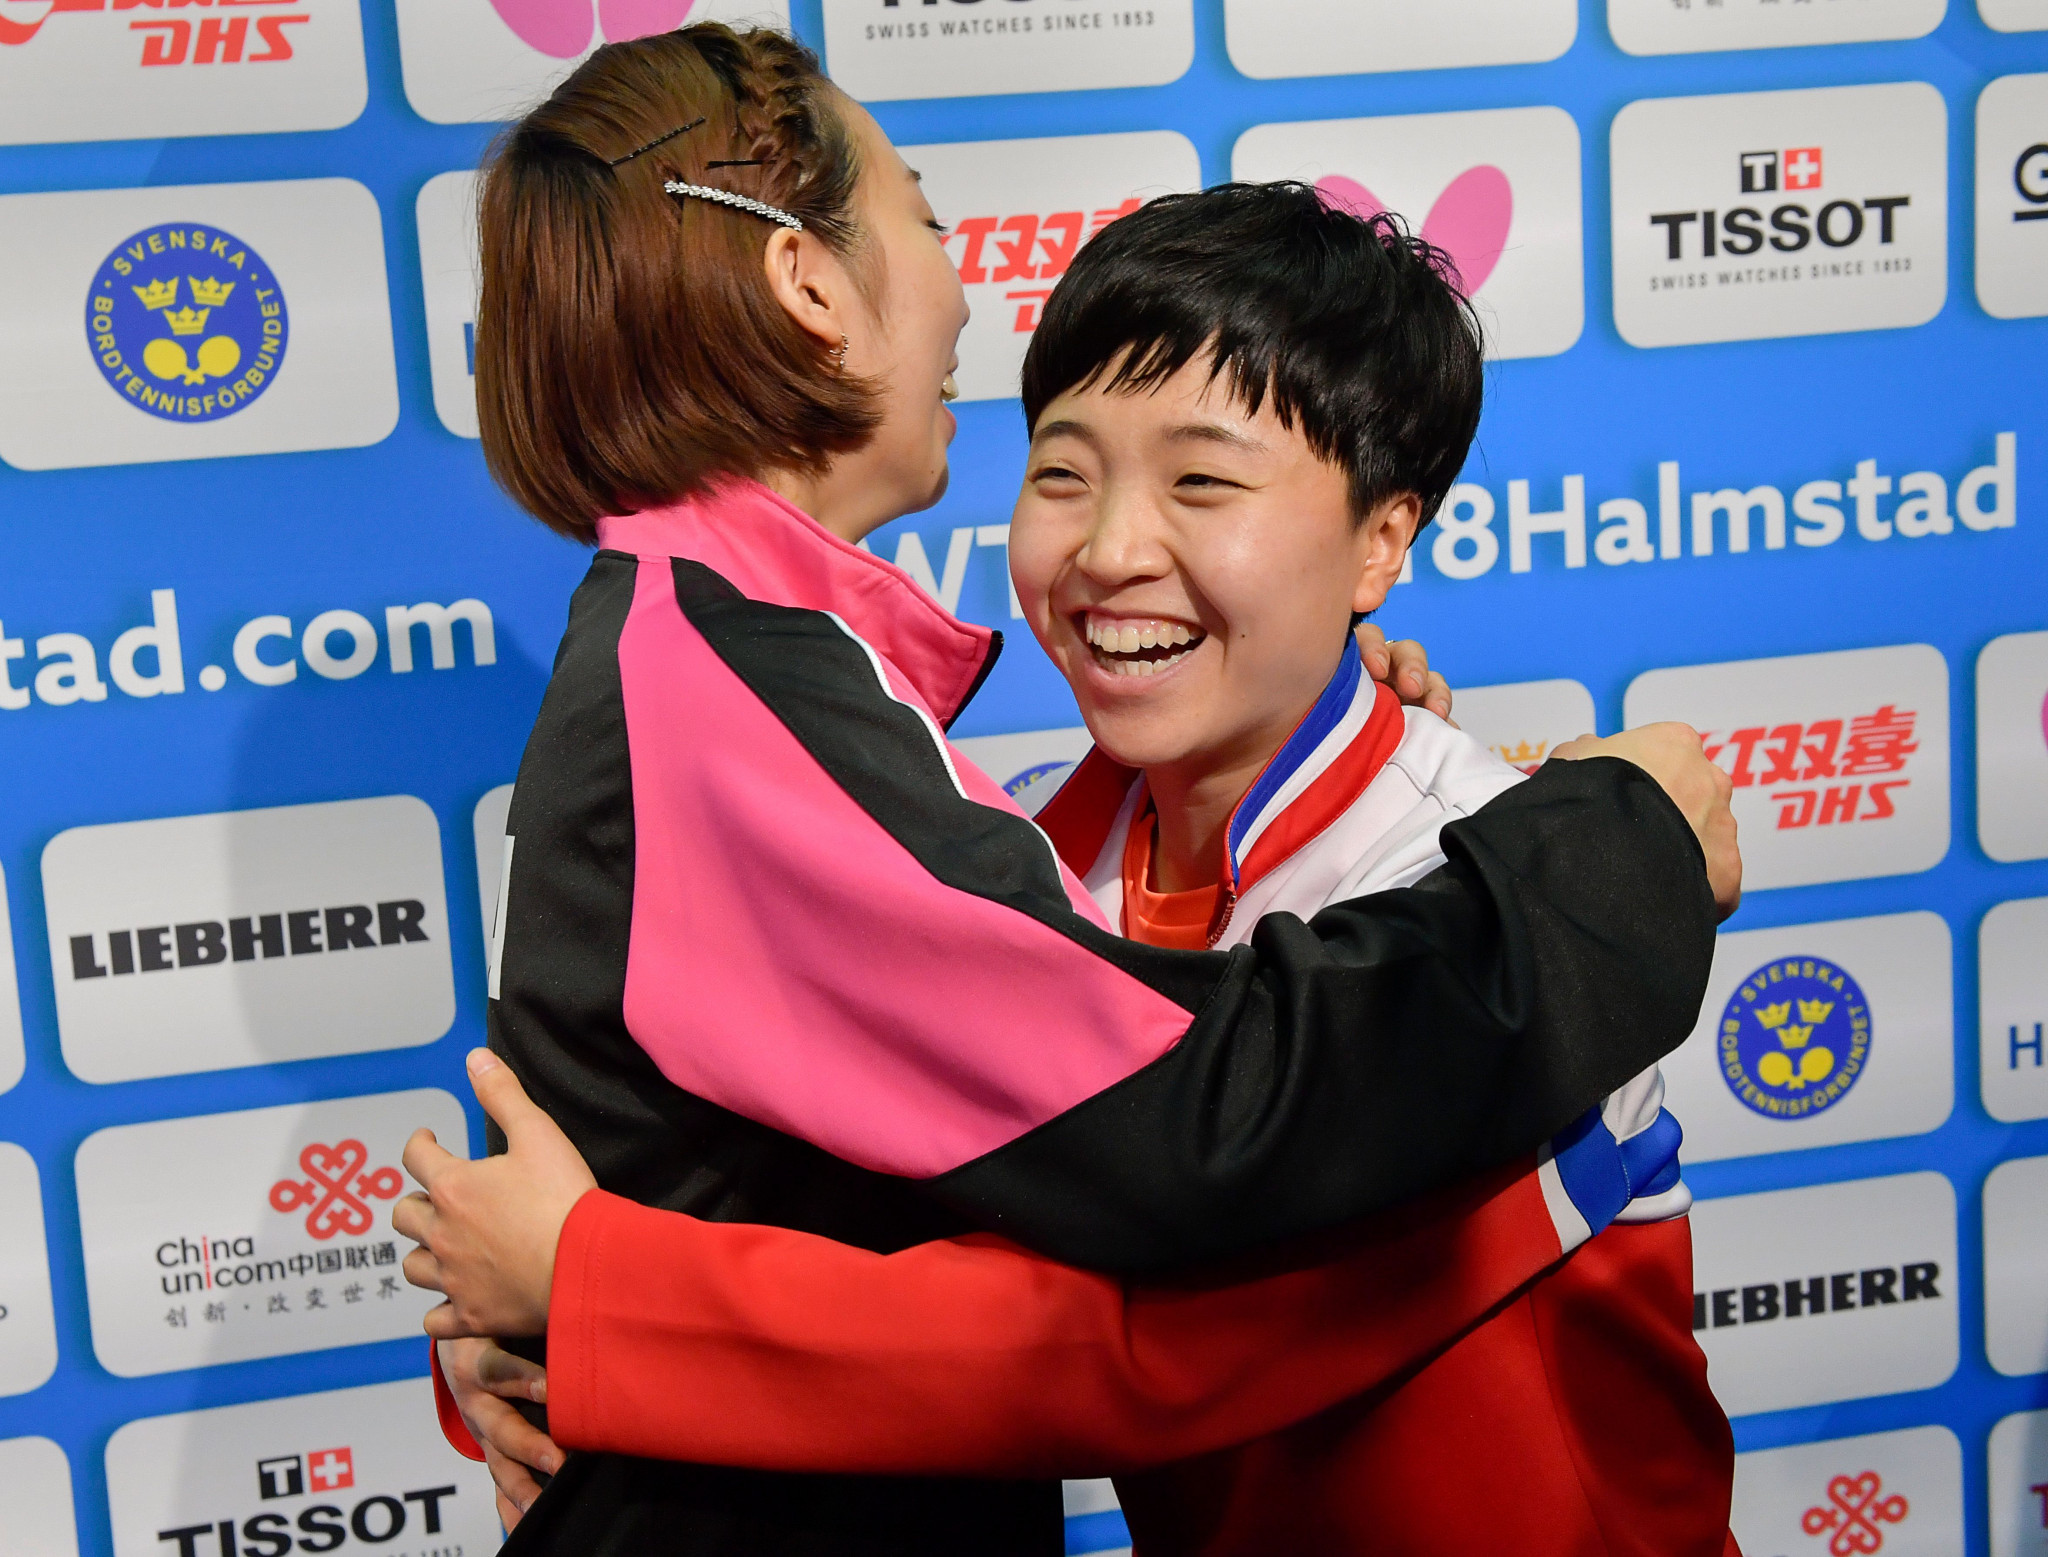 It was all smiles for the Korean players after the ITTF gave approval for a unified team ©Getty Images